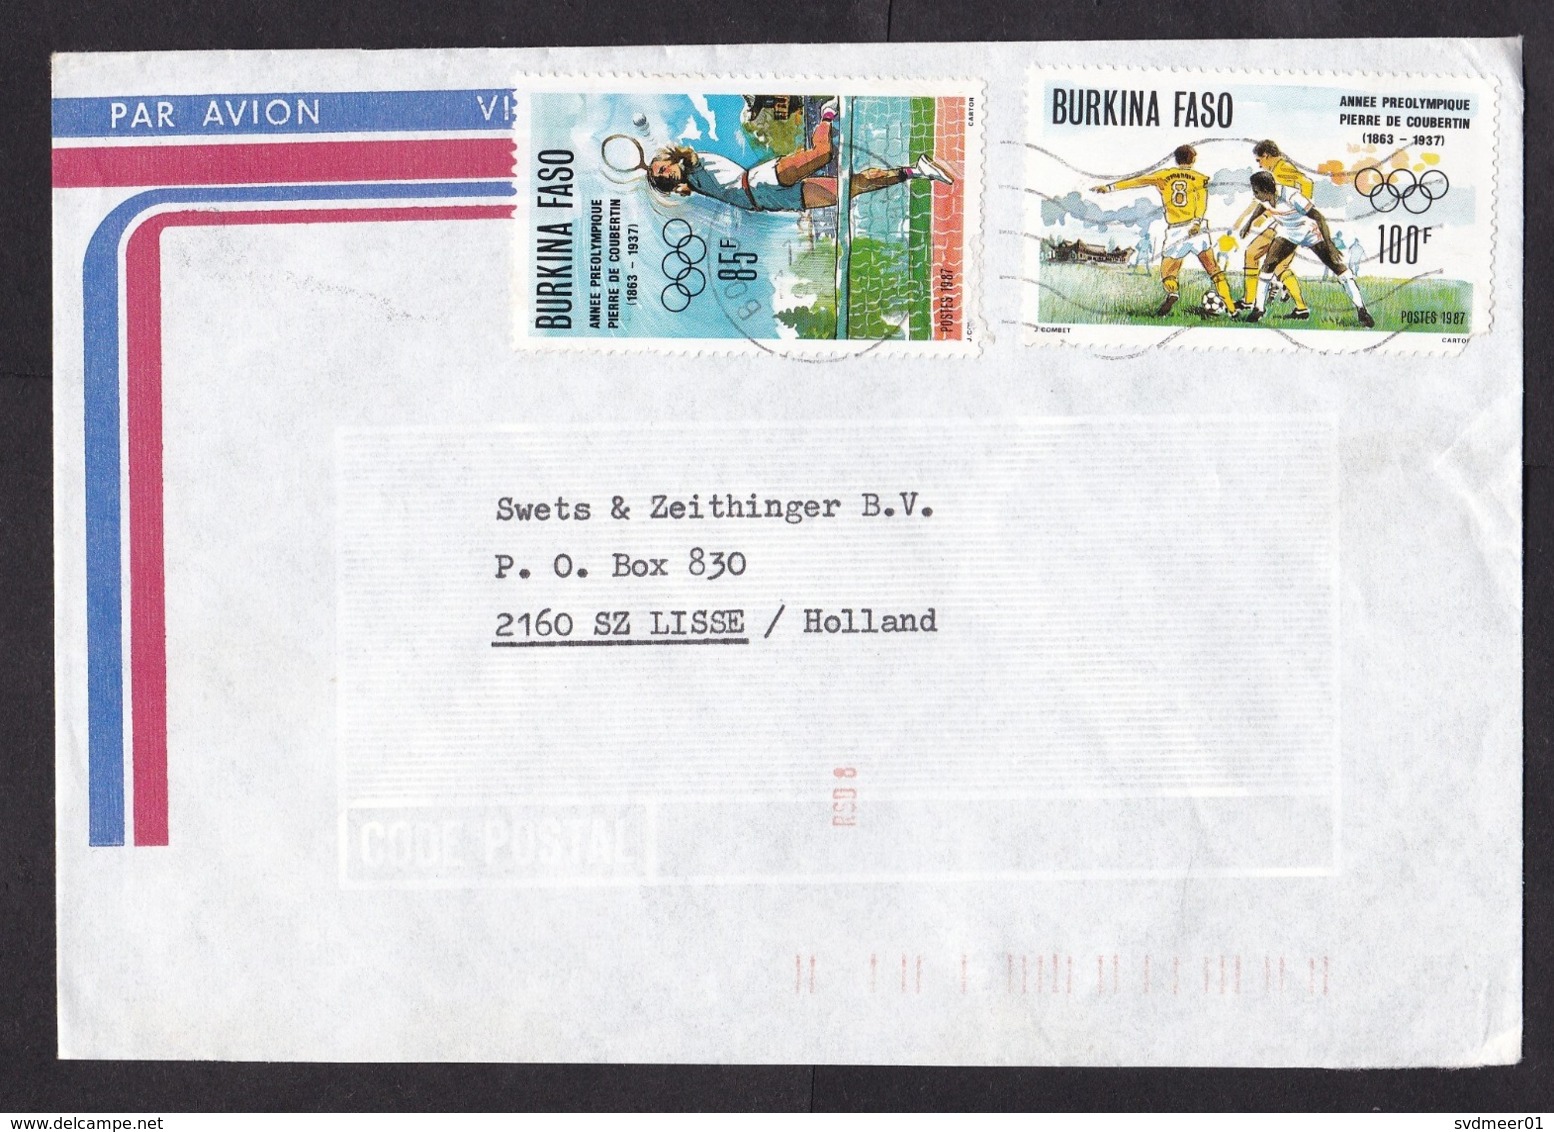 Burkina Faso: Airmail Cover To Netherlands, 2 Stamps, Olympics, Soccer, Tennis, Rare Real Use (both Stamps Damaged!) - Burkina Faso (1984-...)